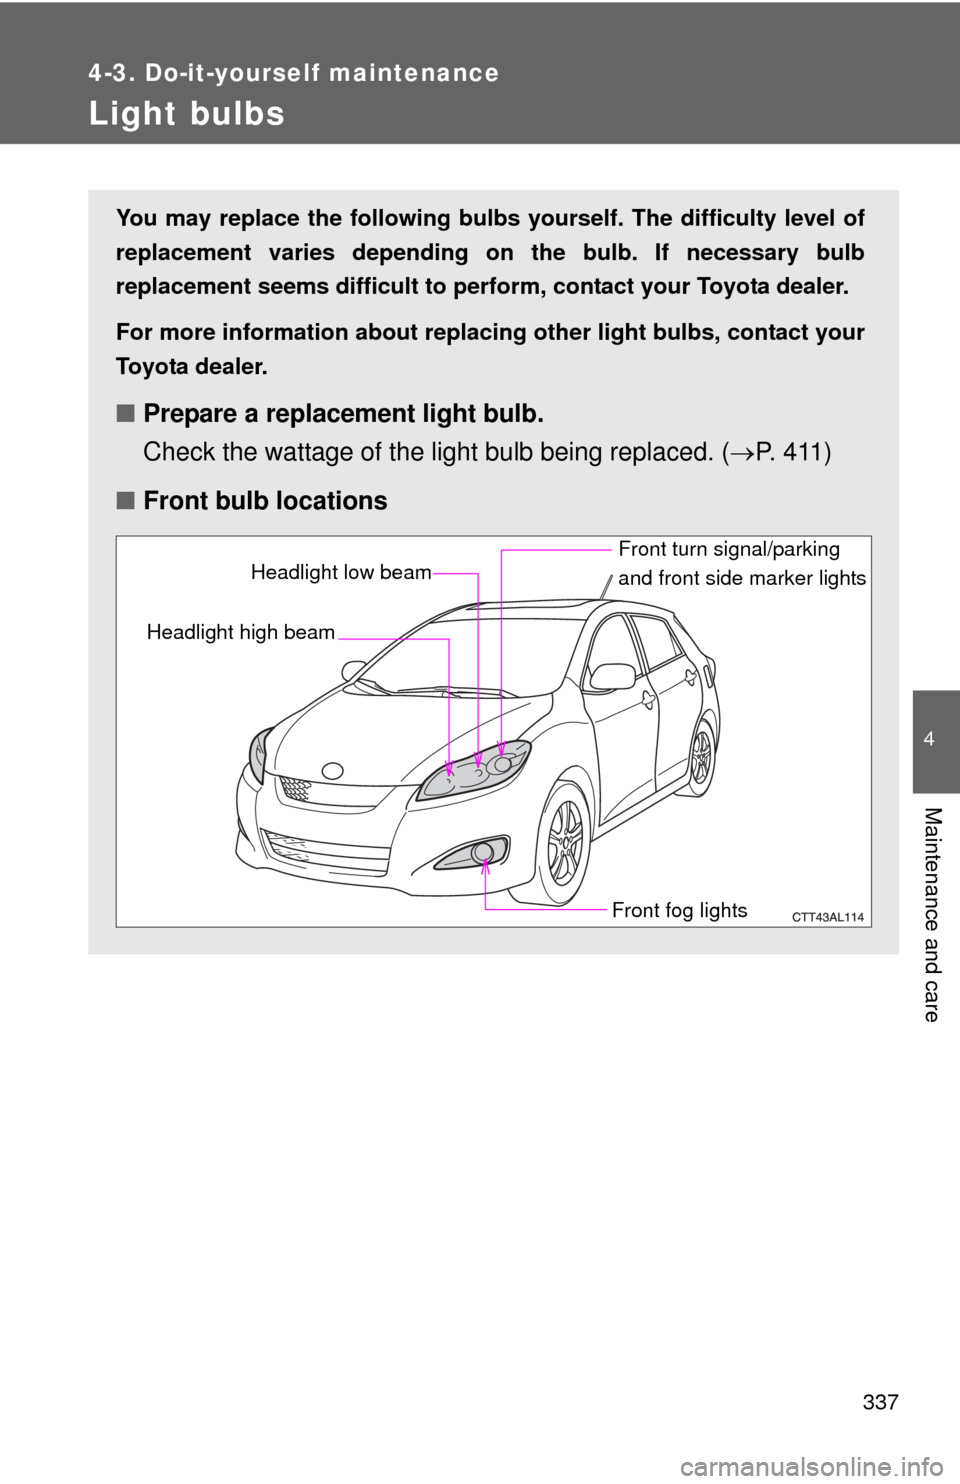 TOYOTA MATRIX 2010 E140 / 2.G Owners Manual 337
4-3. Do-it-yourself maintenance
4
Maintenance and care
Light bulbs
You may replace the following bulbs yourself. The difficulty level of
replacement varies depending on the bulb. If necessary bulb